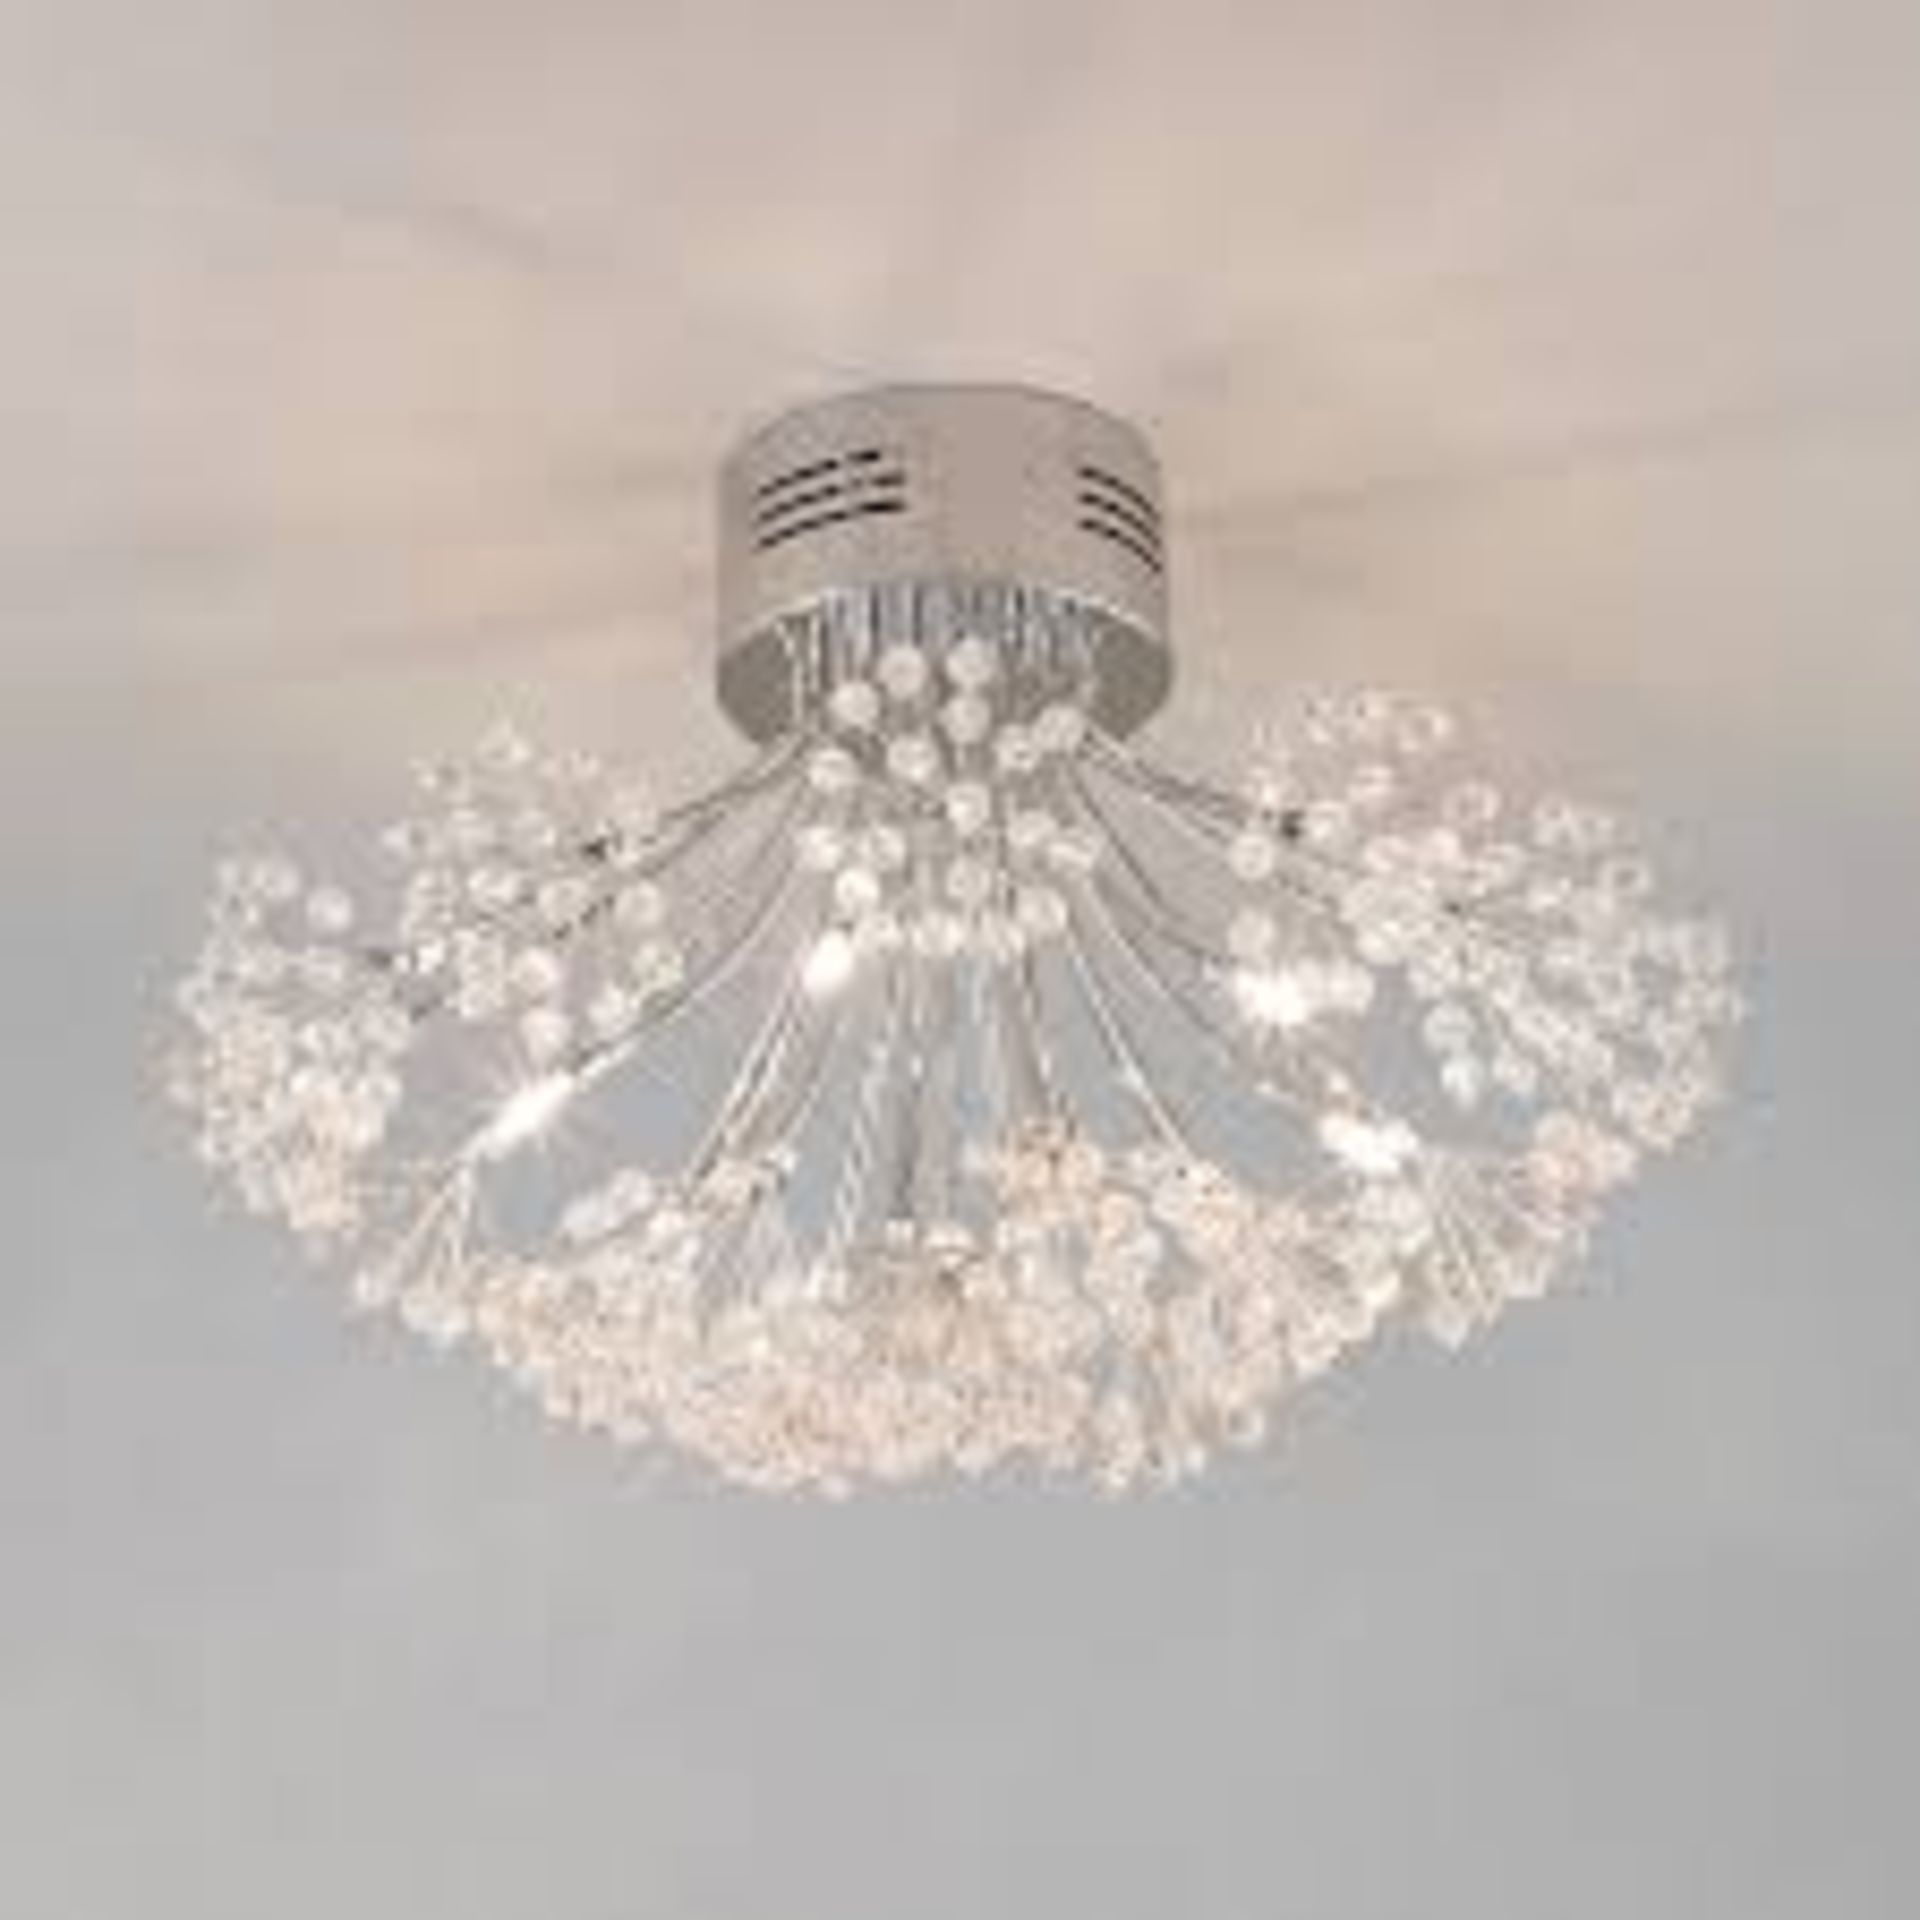 1 x BOXED BLOSSOM 6 LIGHT CEILING FITTING WITH CHROME FINISH AND CRYSTAL EFFECT GLASS RRP £140 (